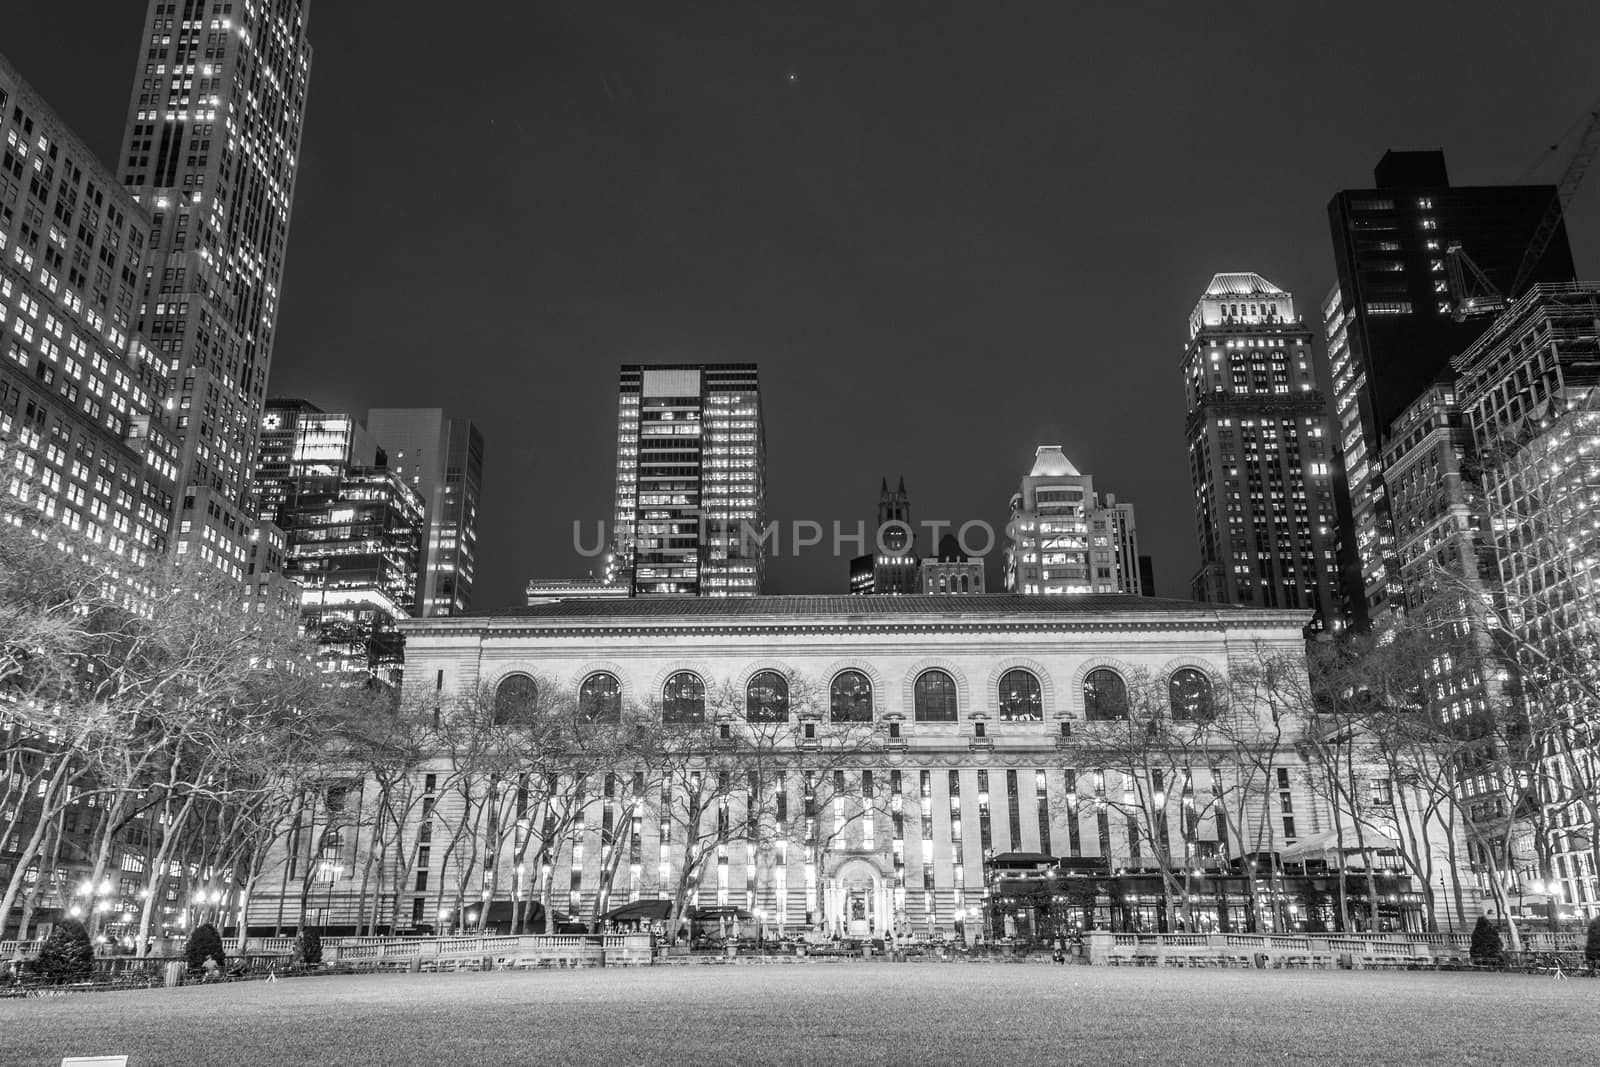 New York Public Library in black and white by rmbarricarte